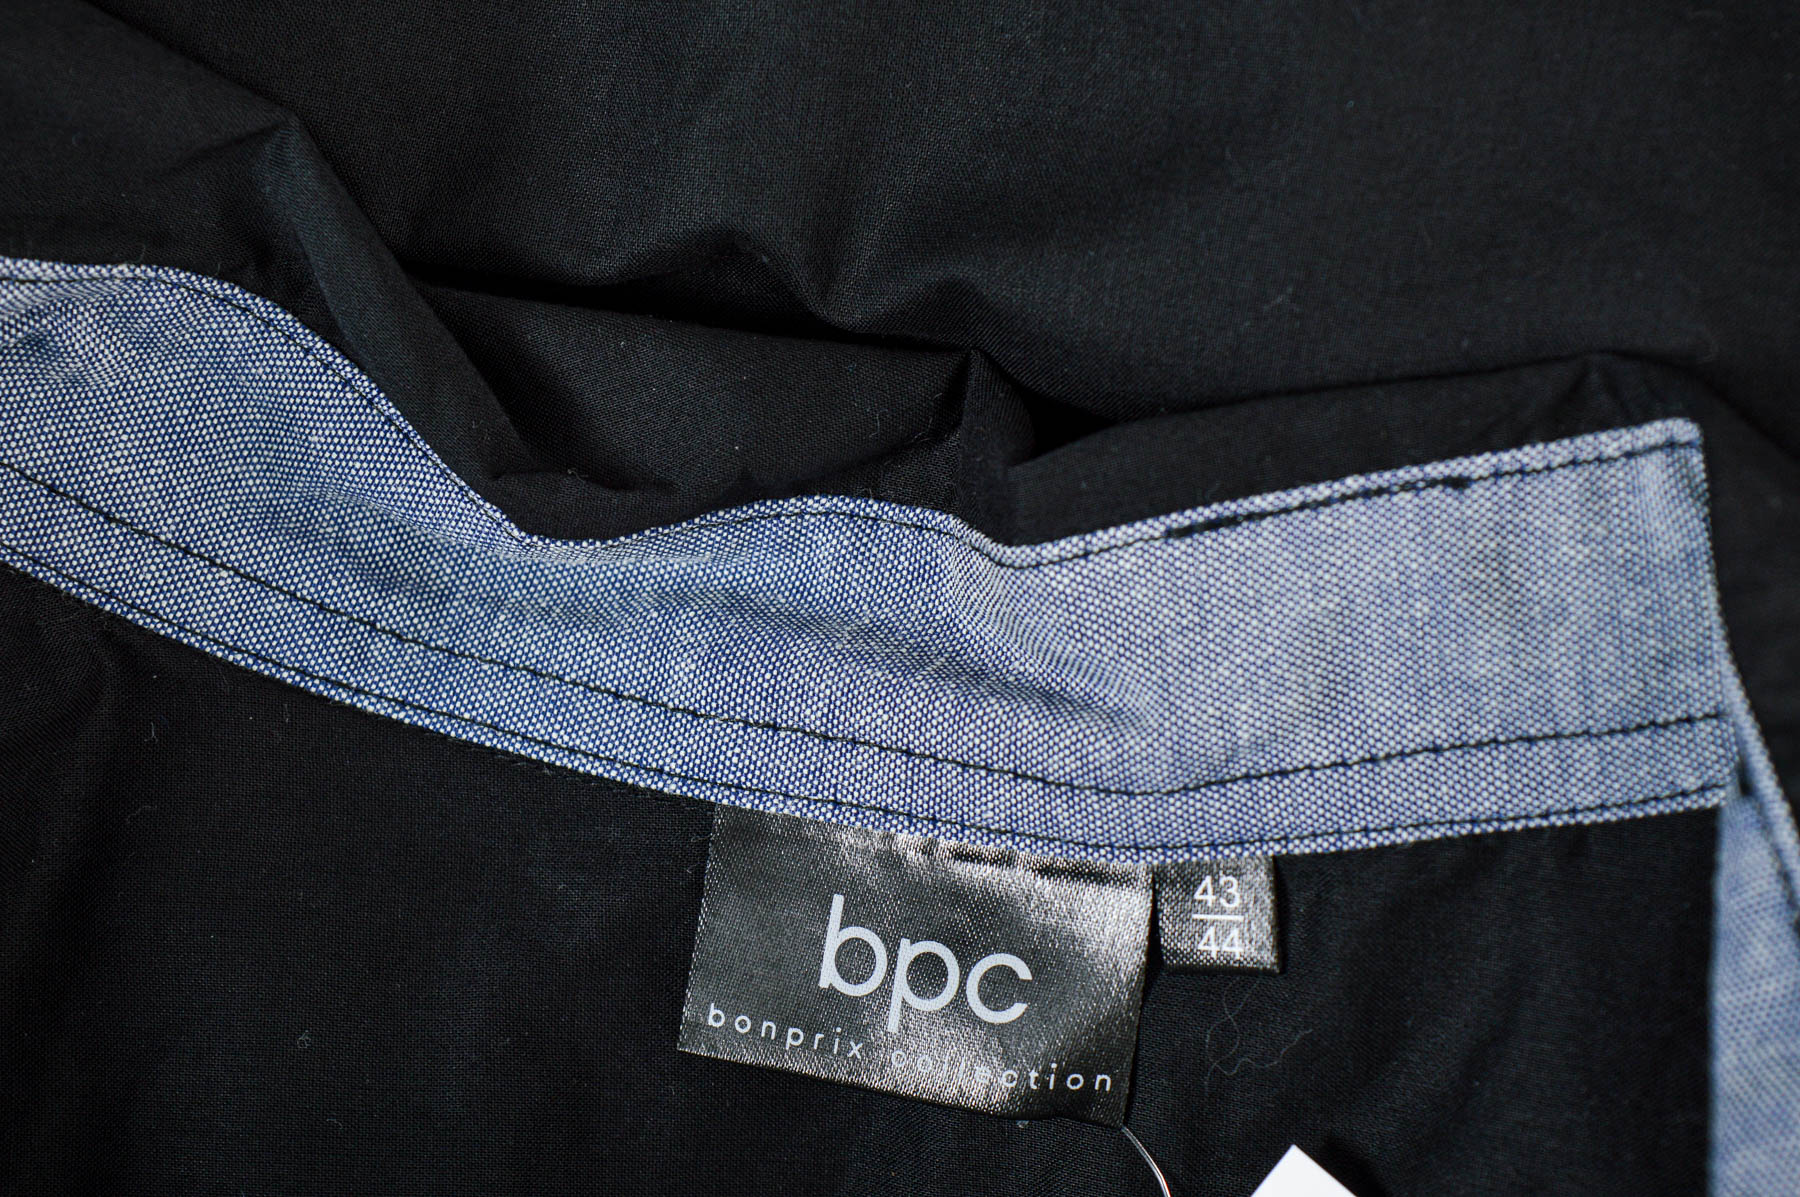 b.p.c. Bonprix Collection Fashion at reasonable prices, Secondhand